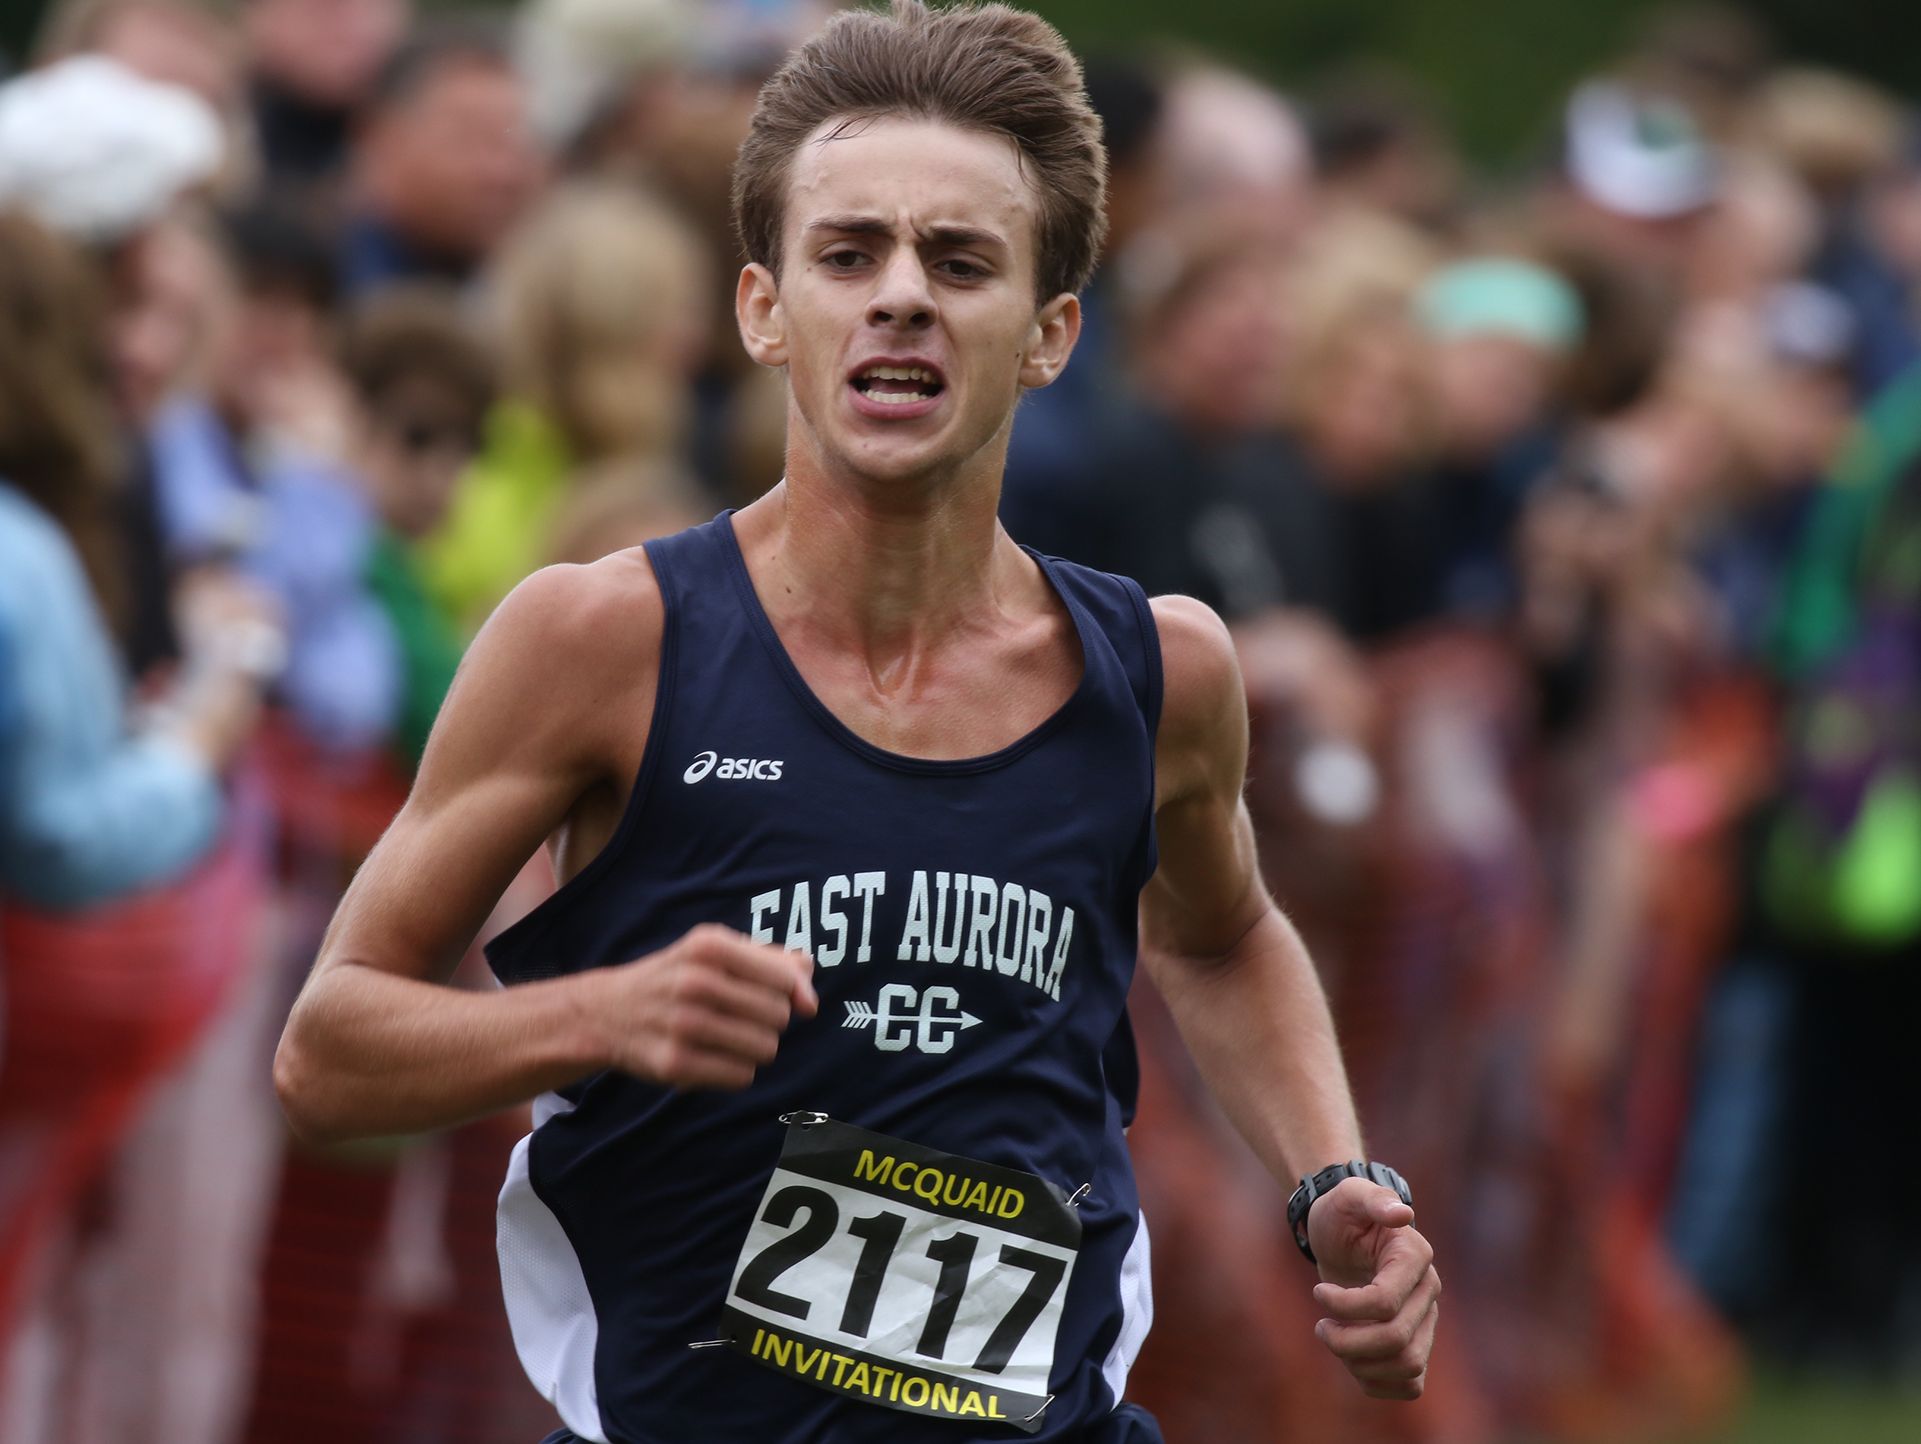 Ian Russ of East Aurora comes in first with a time of 14:46.5 in the Boys Seeded Varsity AA medium schools division.